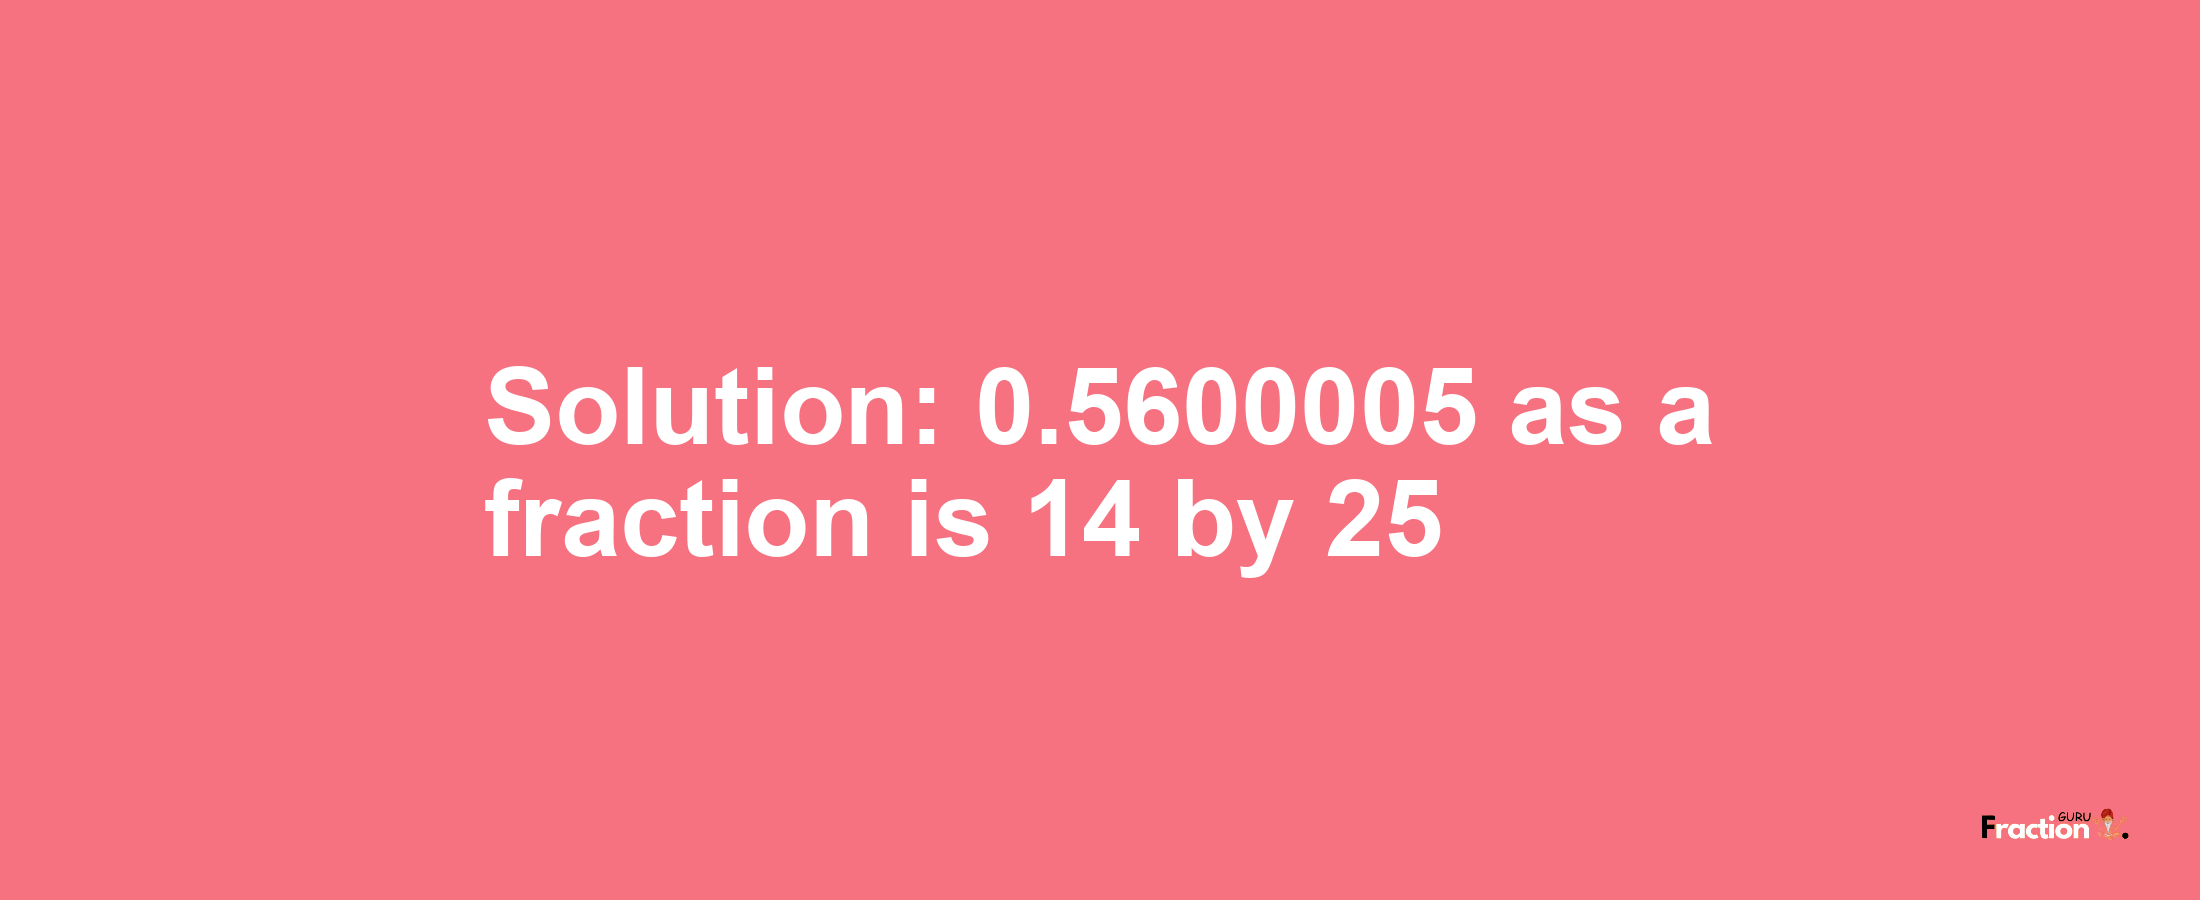 Solution:0.5600005 as a fraction is 14/25